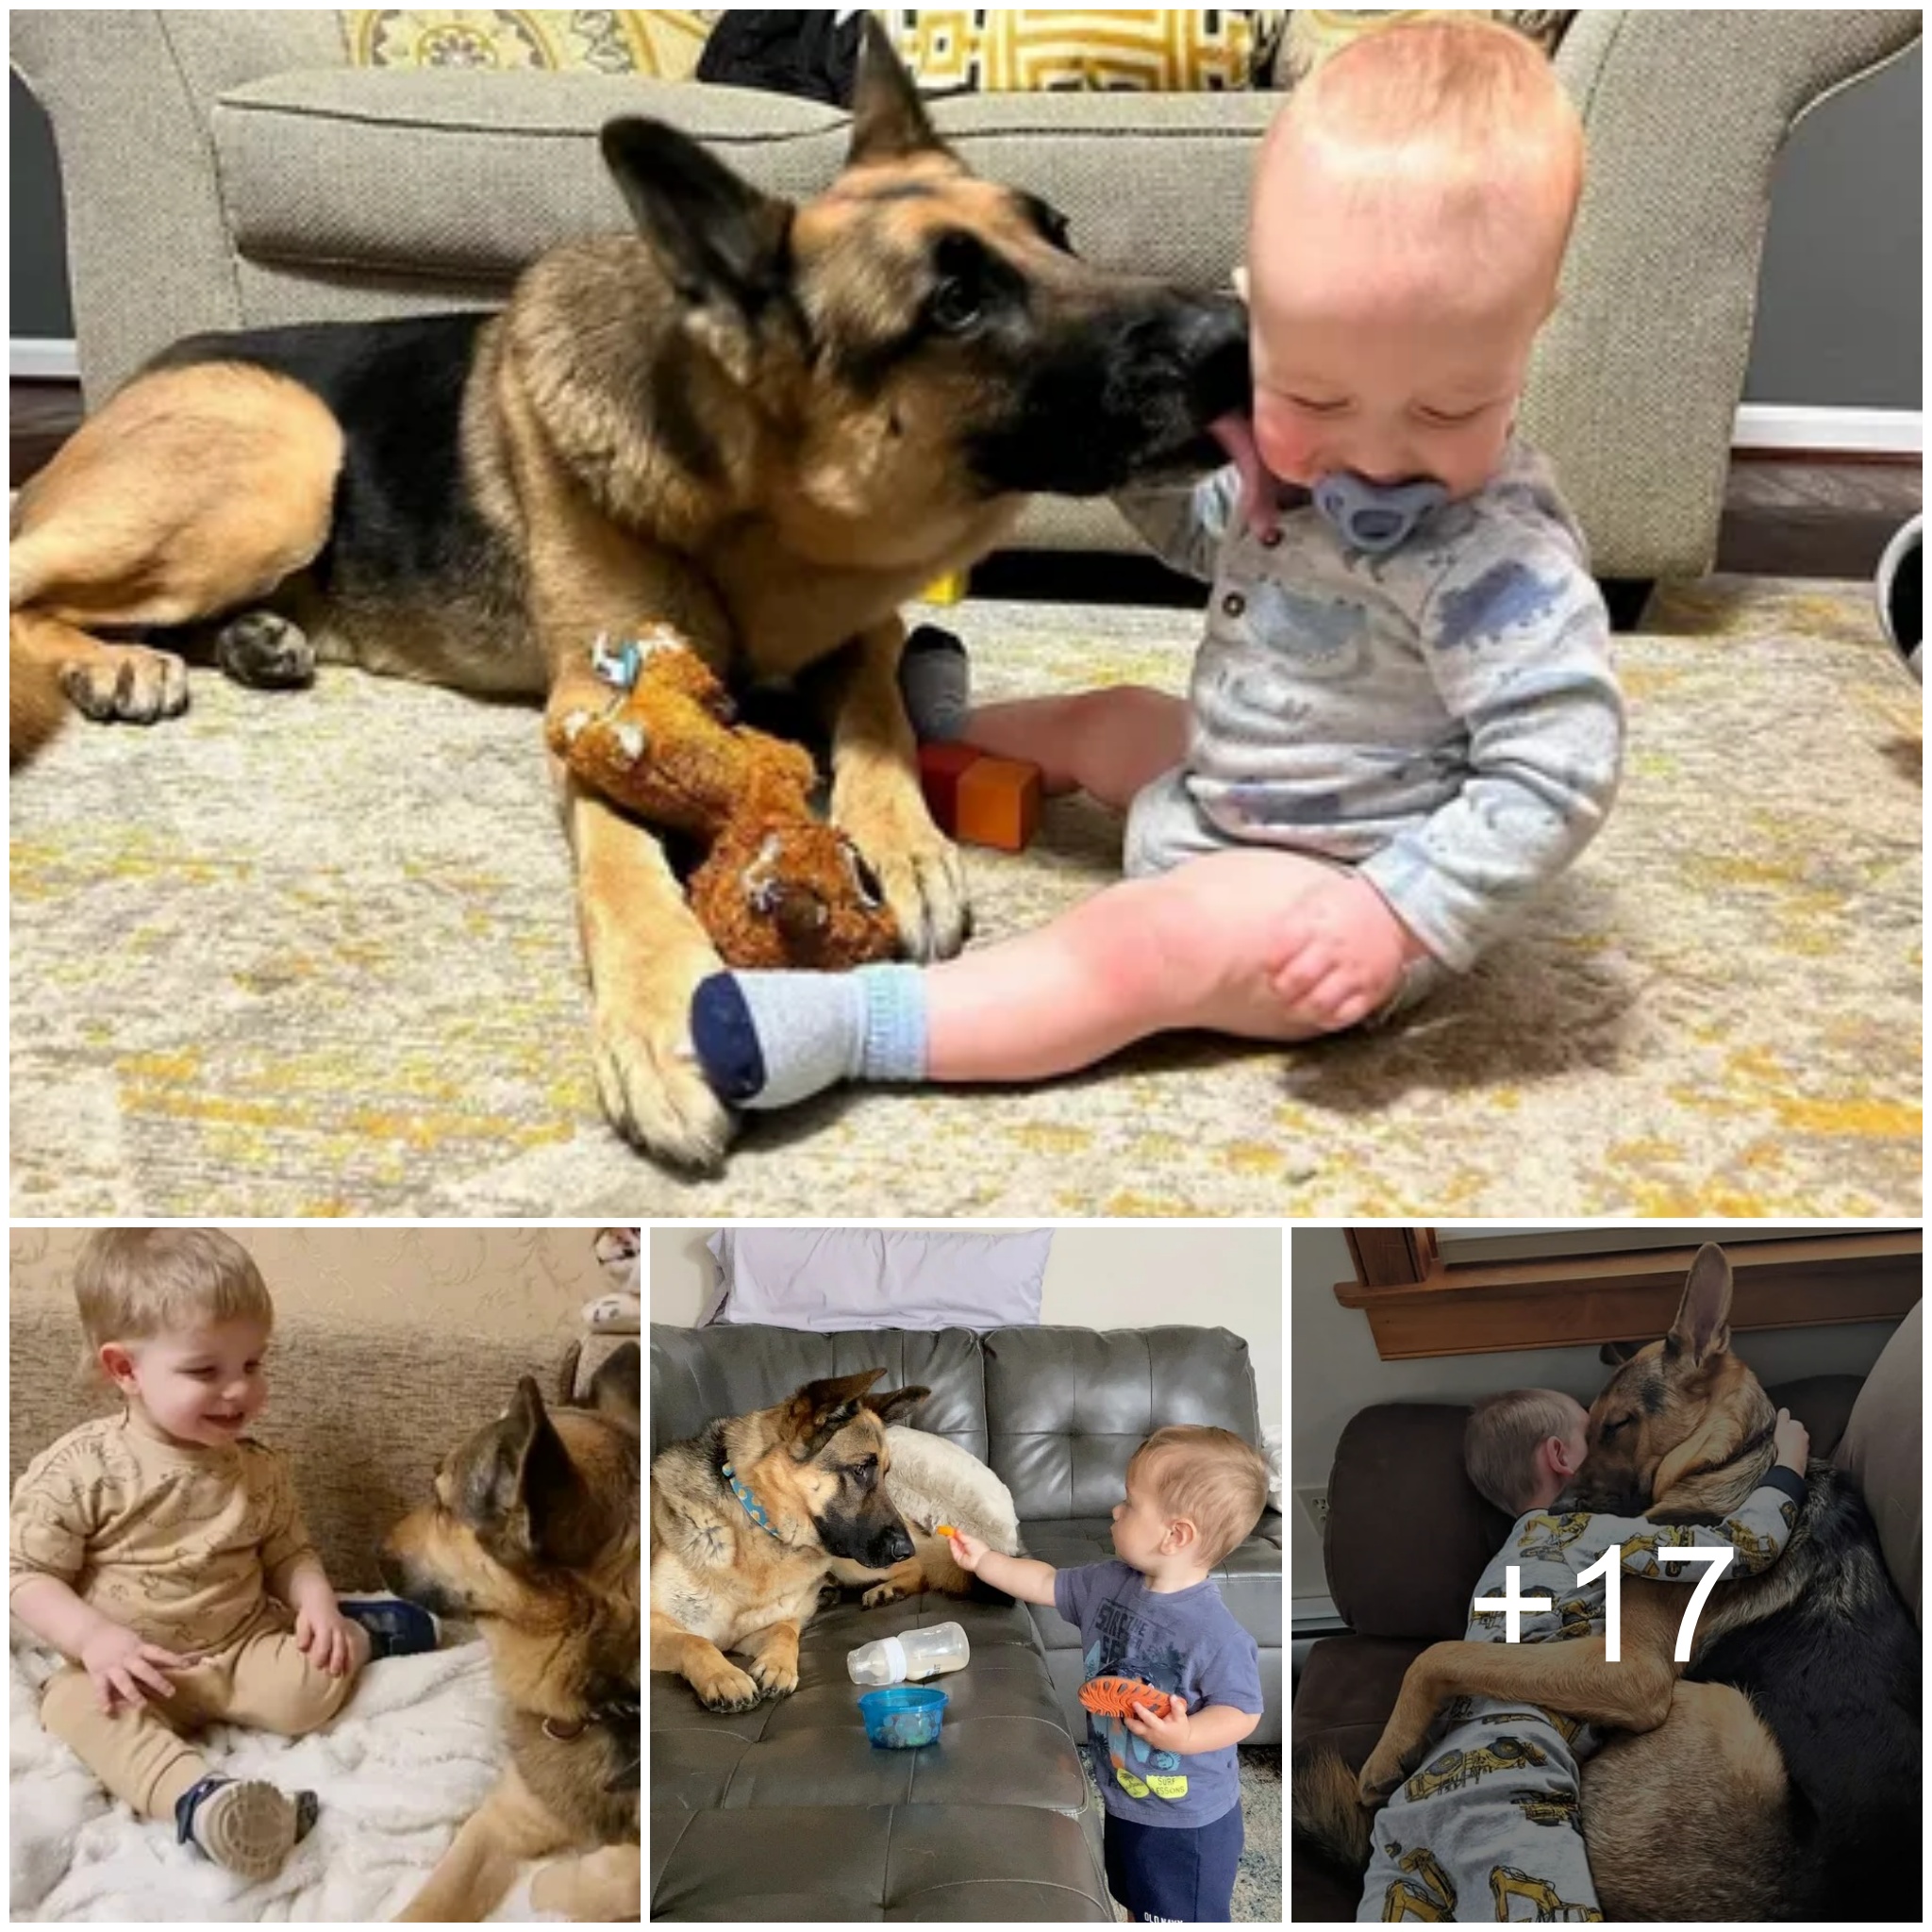 “From Abandoned to Adored: Heartwarming Reunion of Dog and Baby Will Melt Your Heart!”